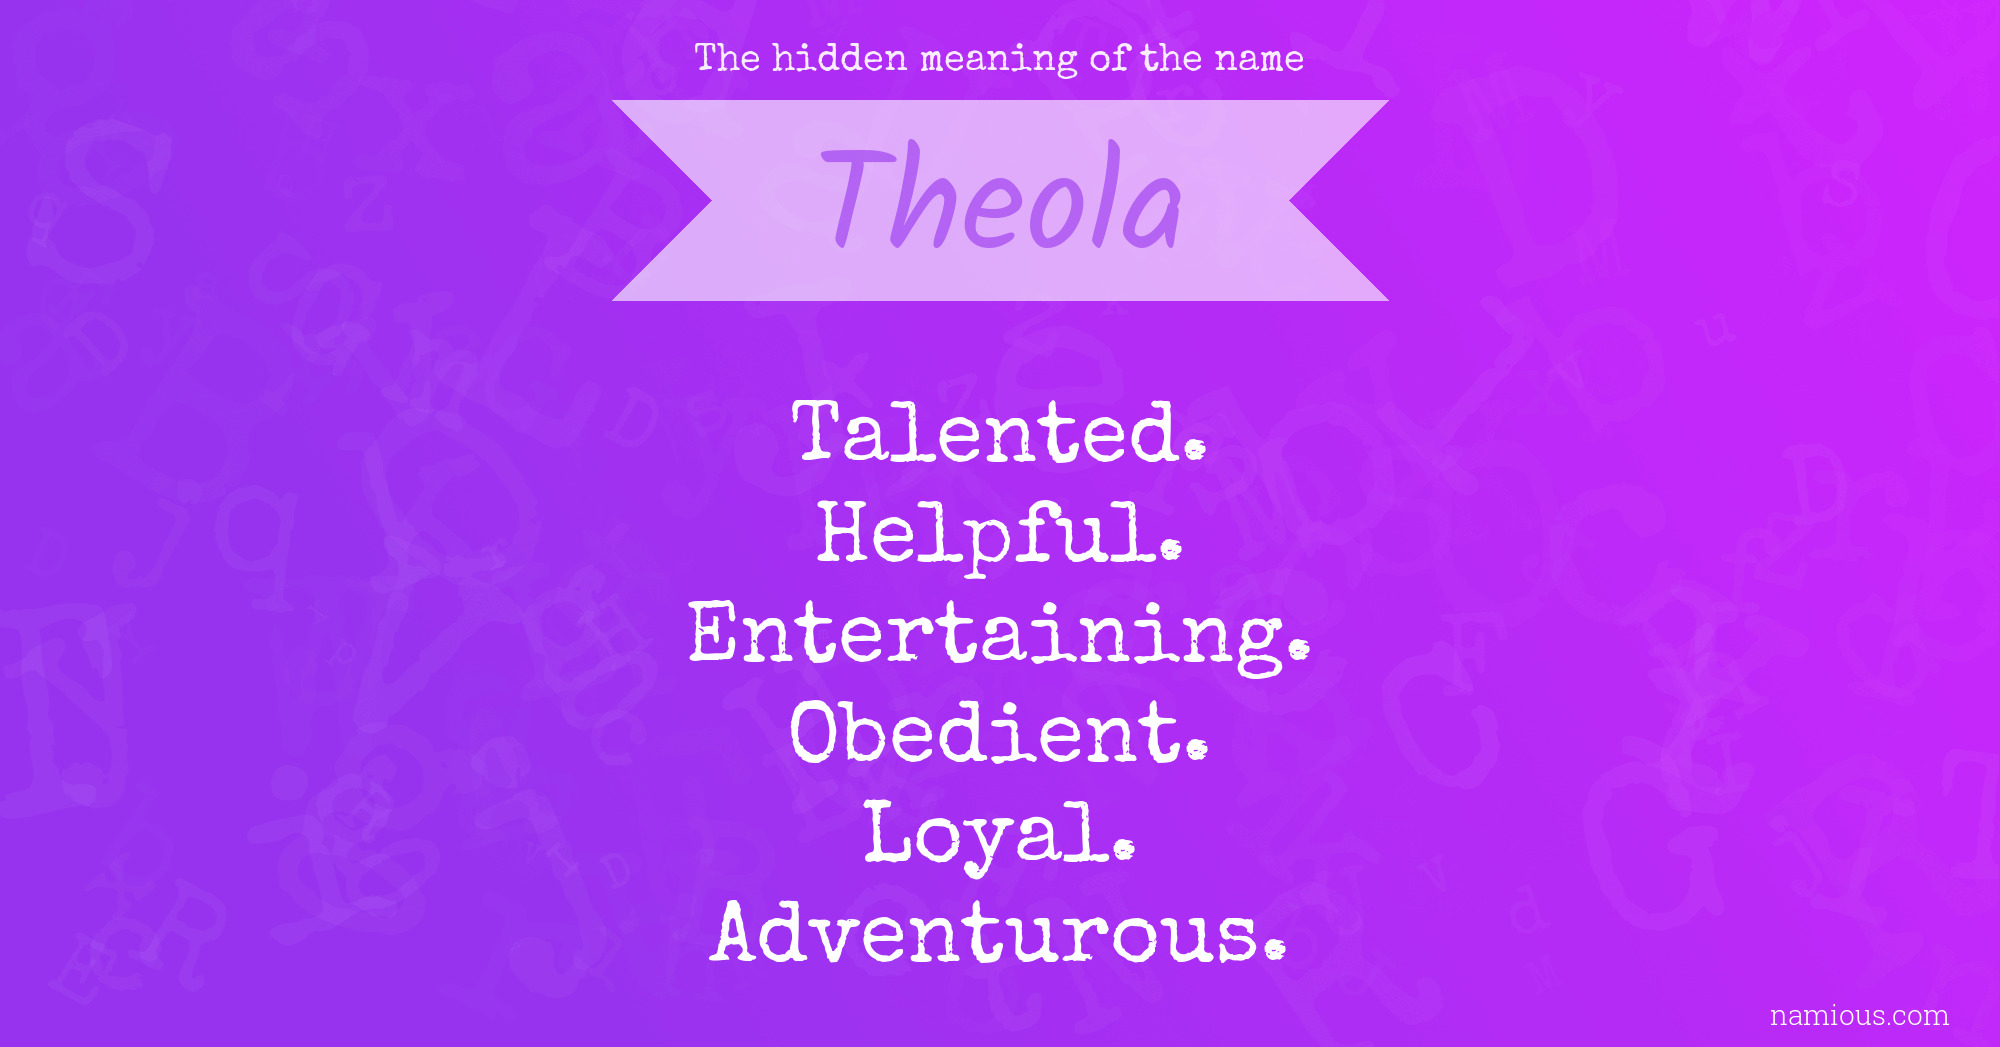 The hidden meaning of the name Theola